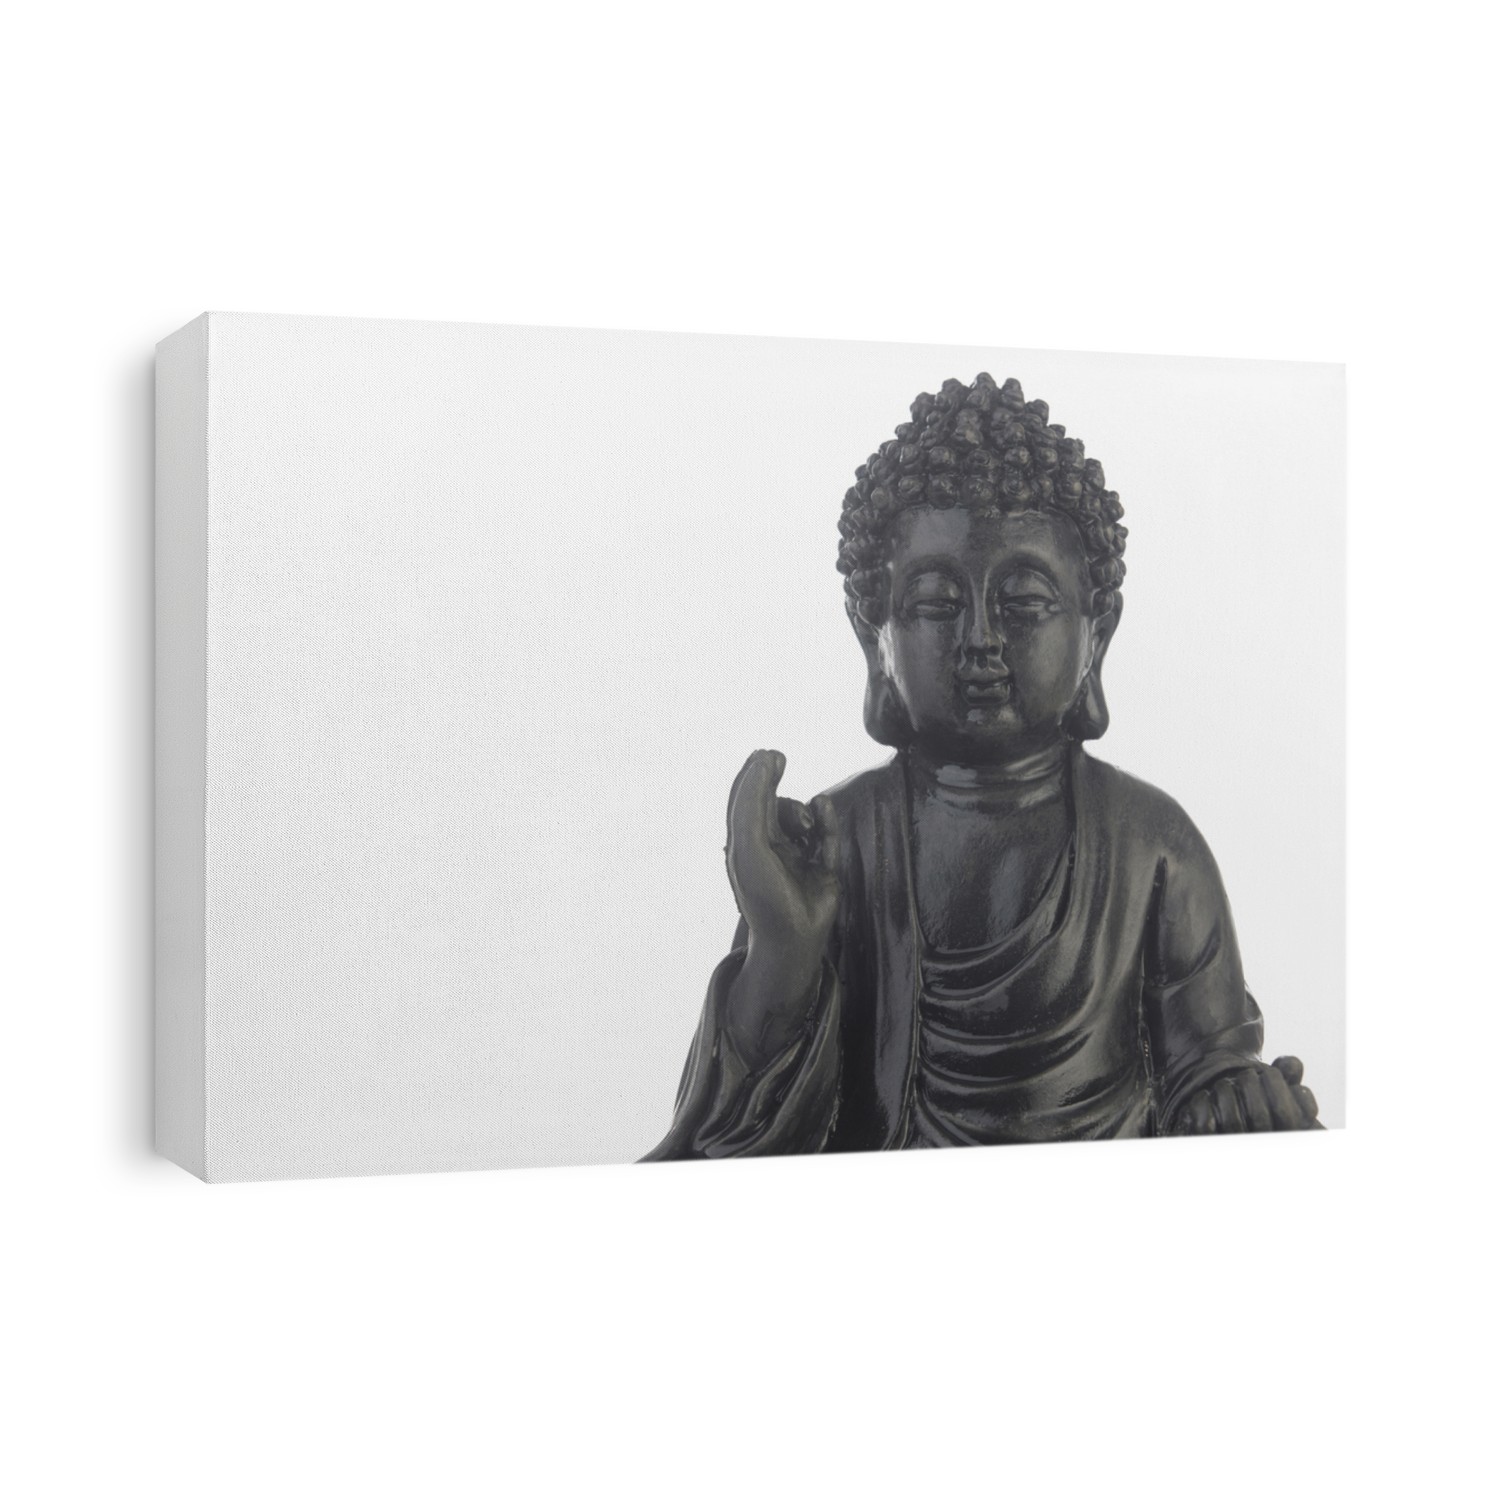 black Buddha statue in a sitting position on the white background